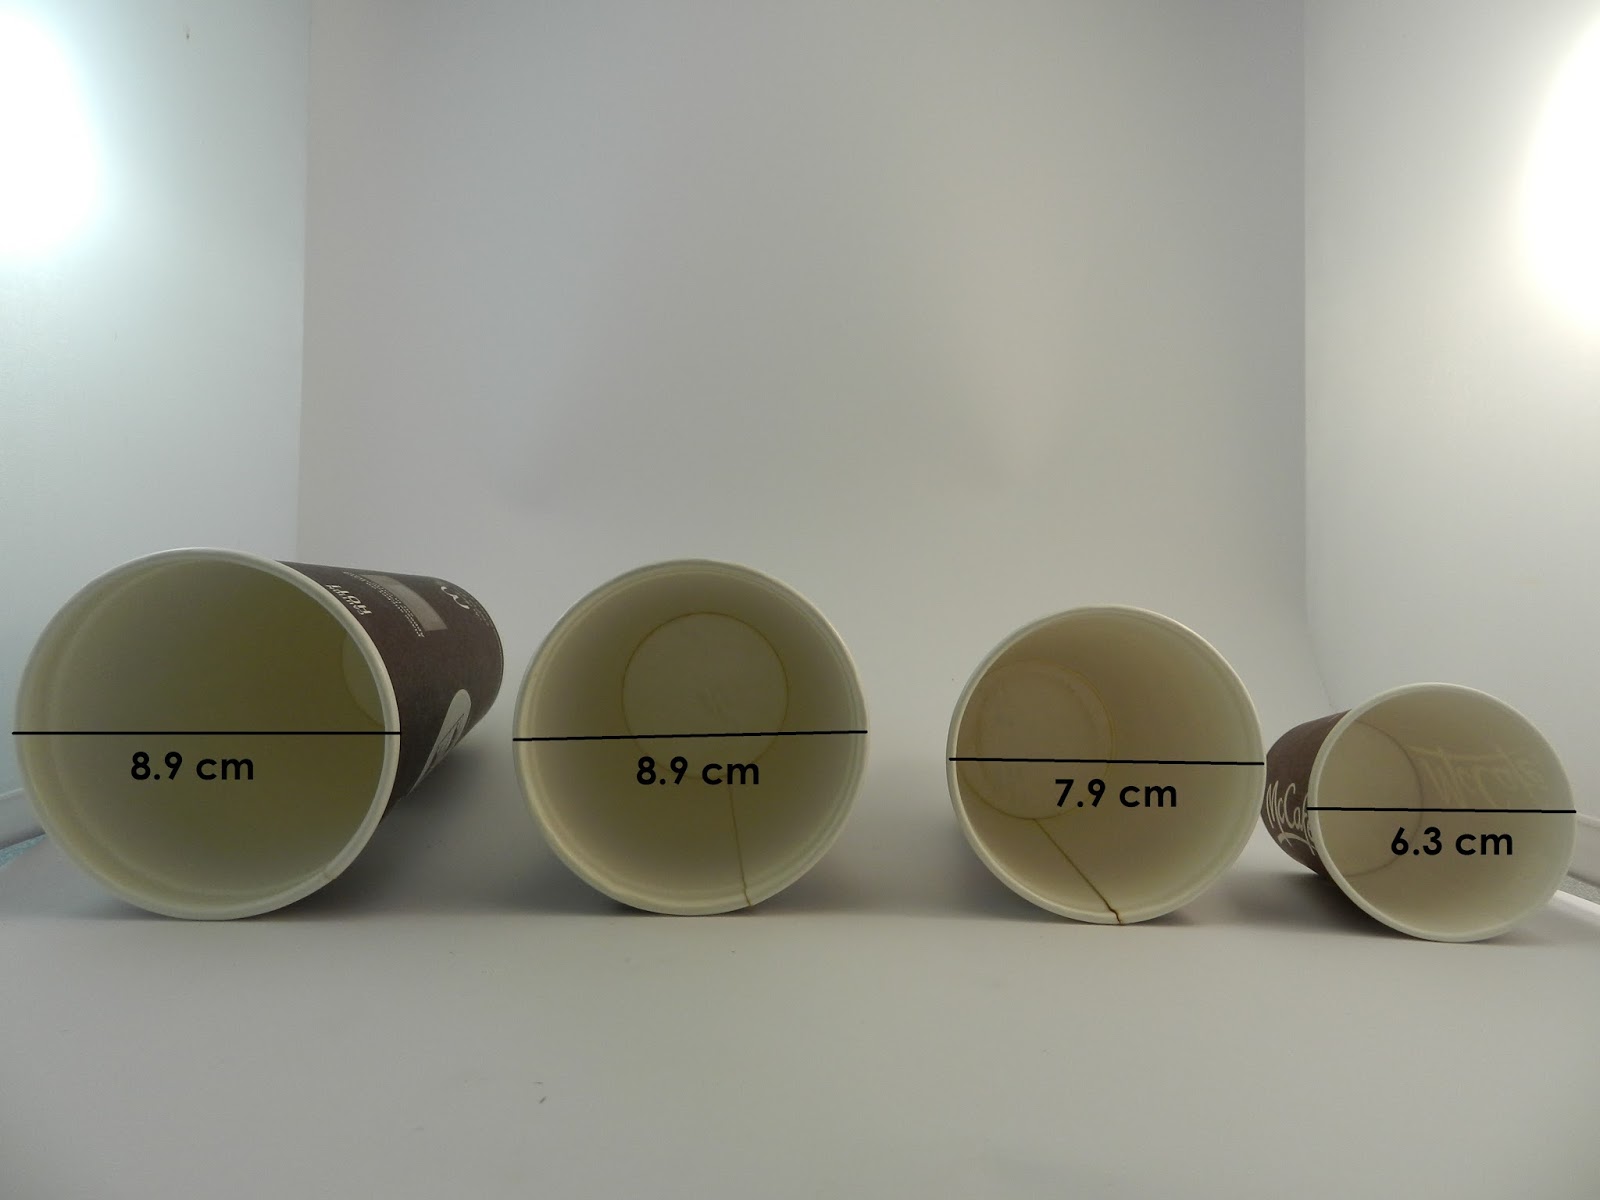 The Scale of Coffee Cups